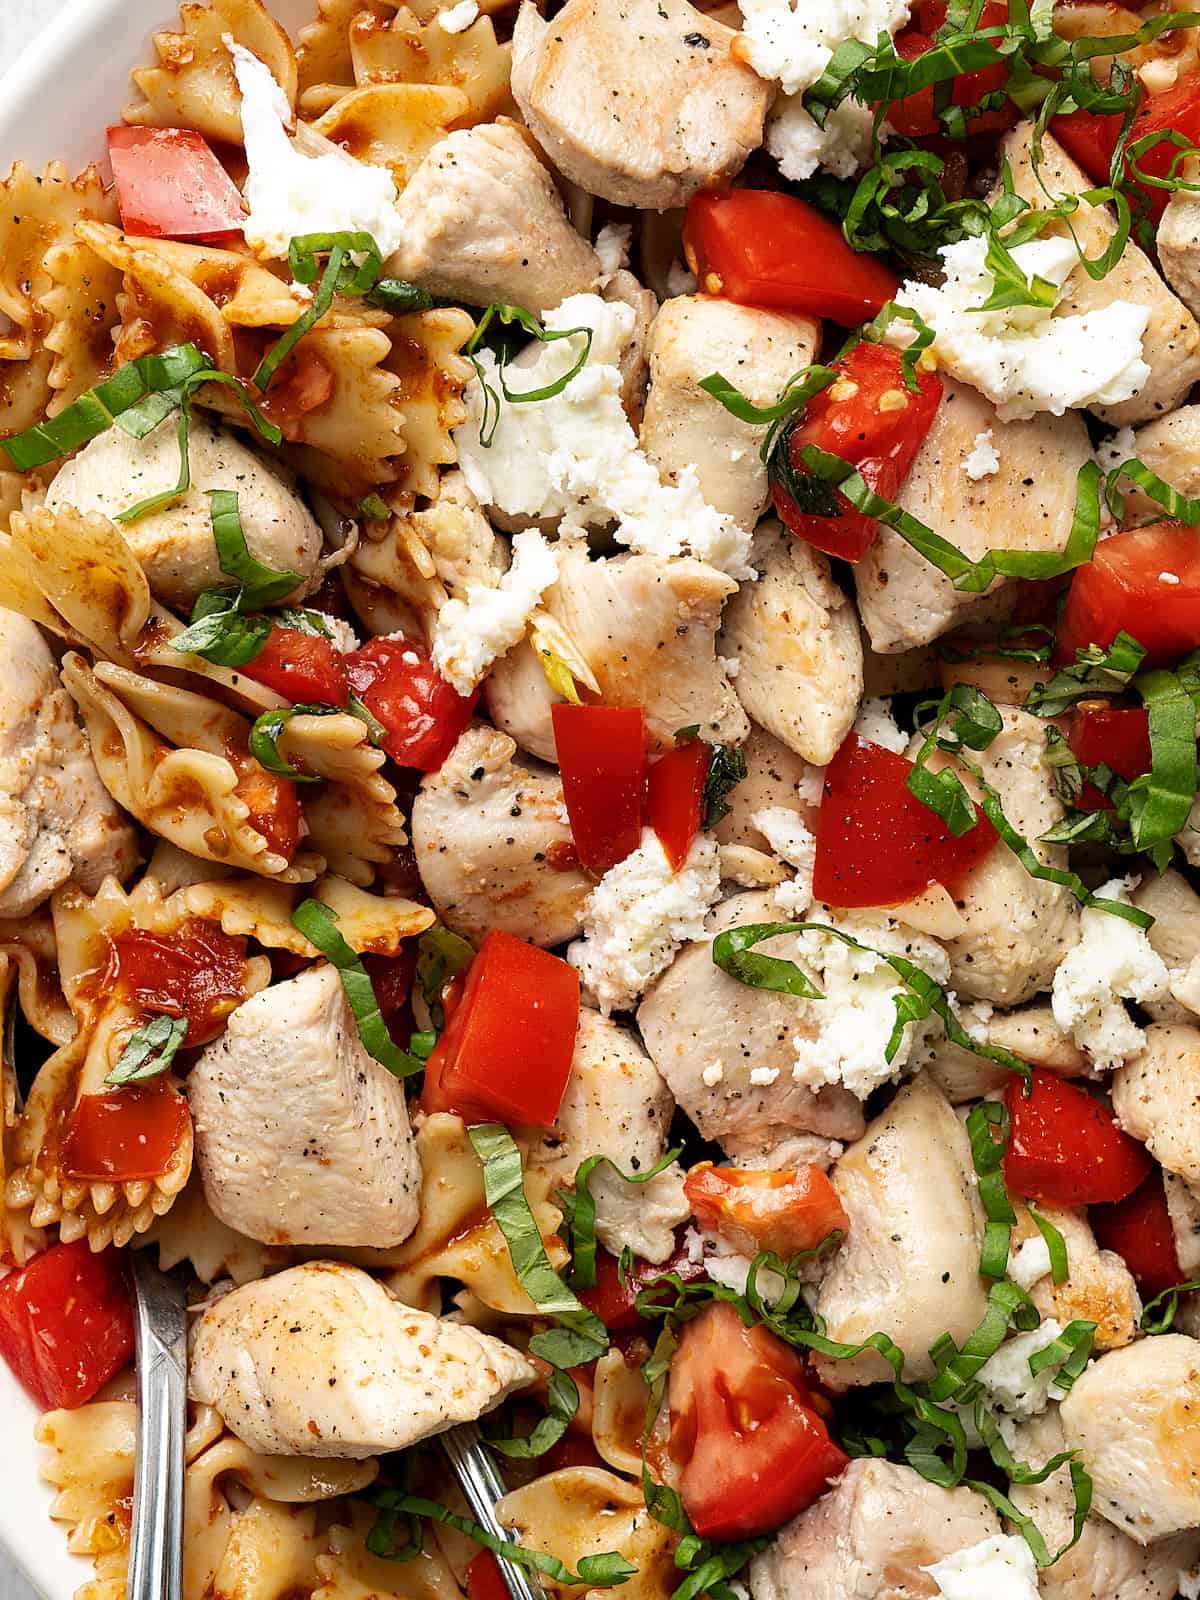 A close-up of Chicken Balsamic Pasta on a platter ready to be served.